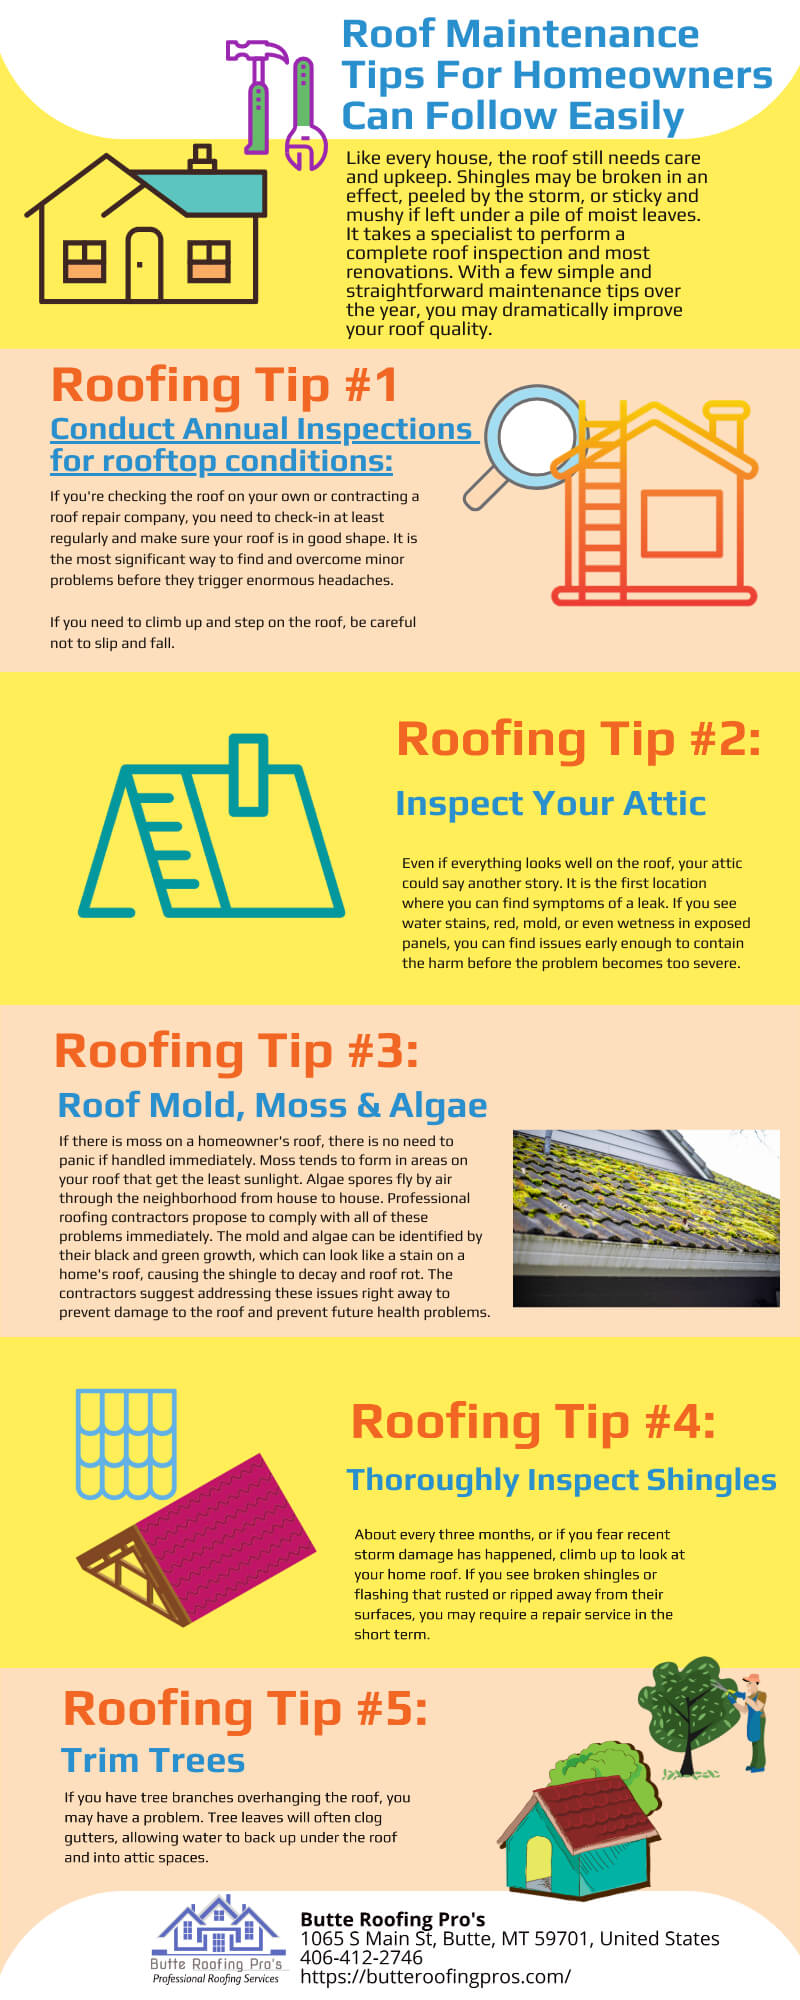 Easy to Follow Roof Maintenance Tips for Homeowners - Infographic